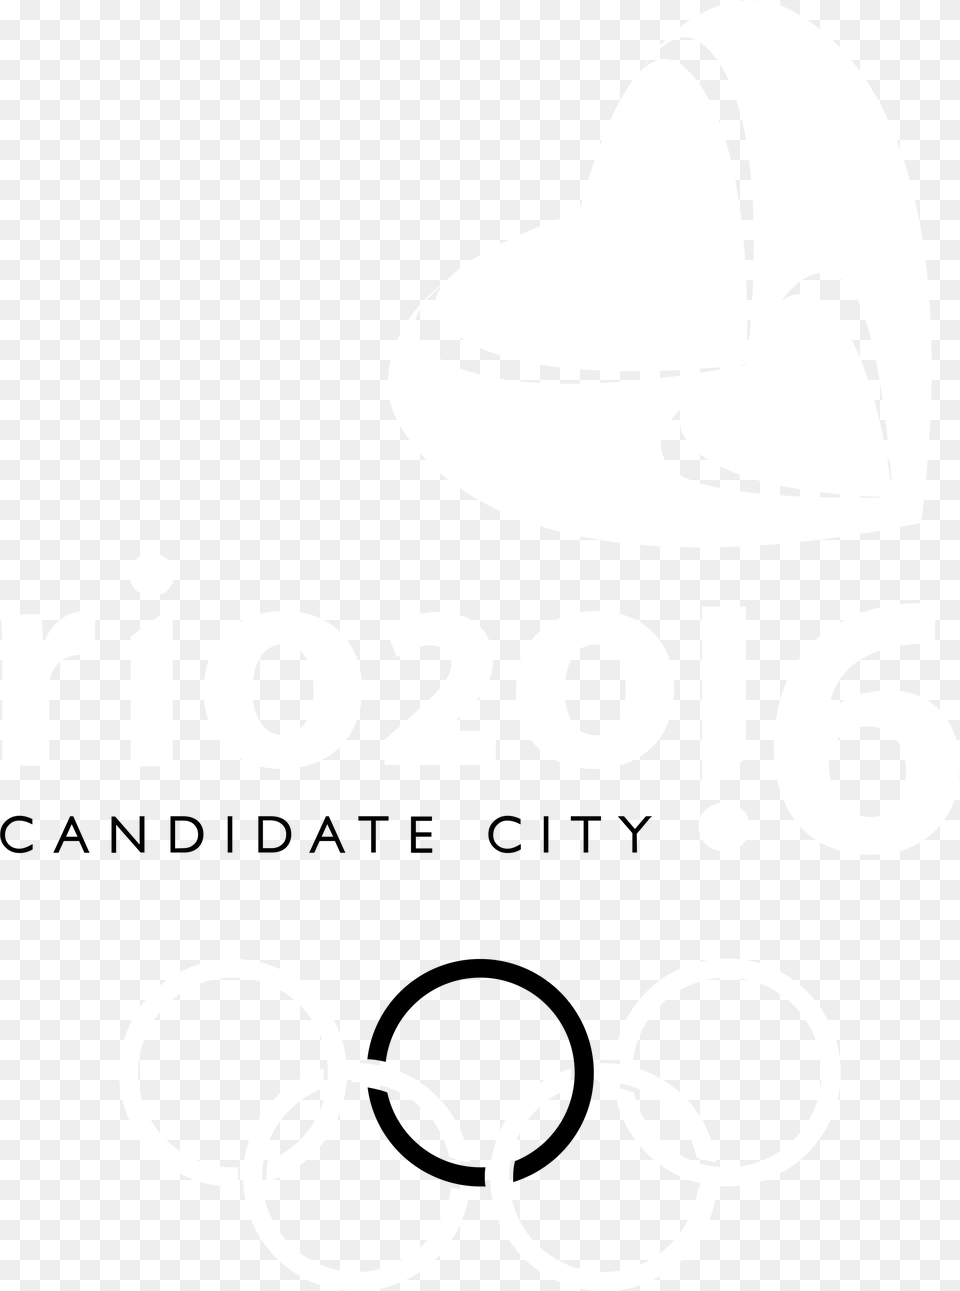 Rio 2016 Candidate City Logo Black And White Circle, Clothing, Hat, Stencil, Hardhat Free Transparent Png